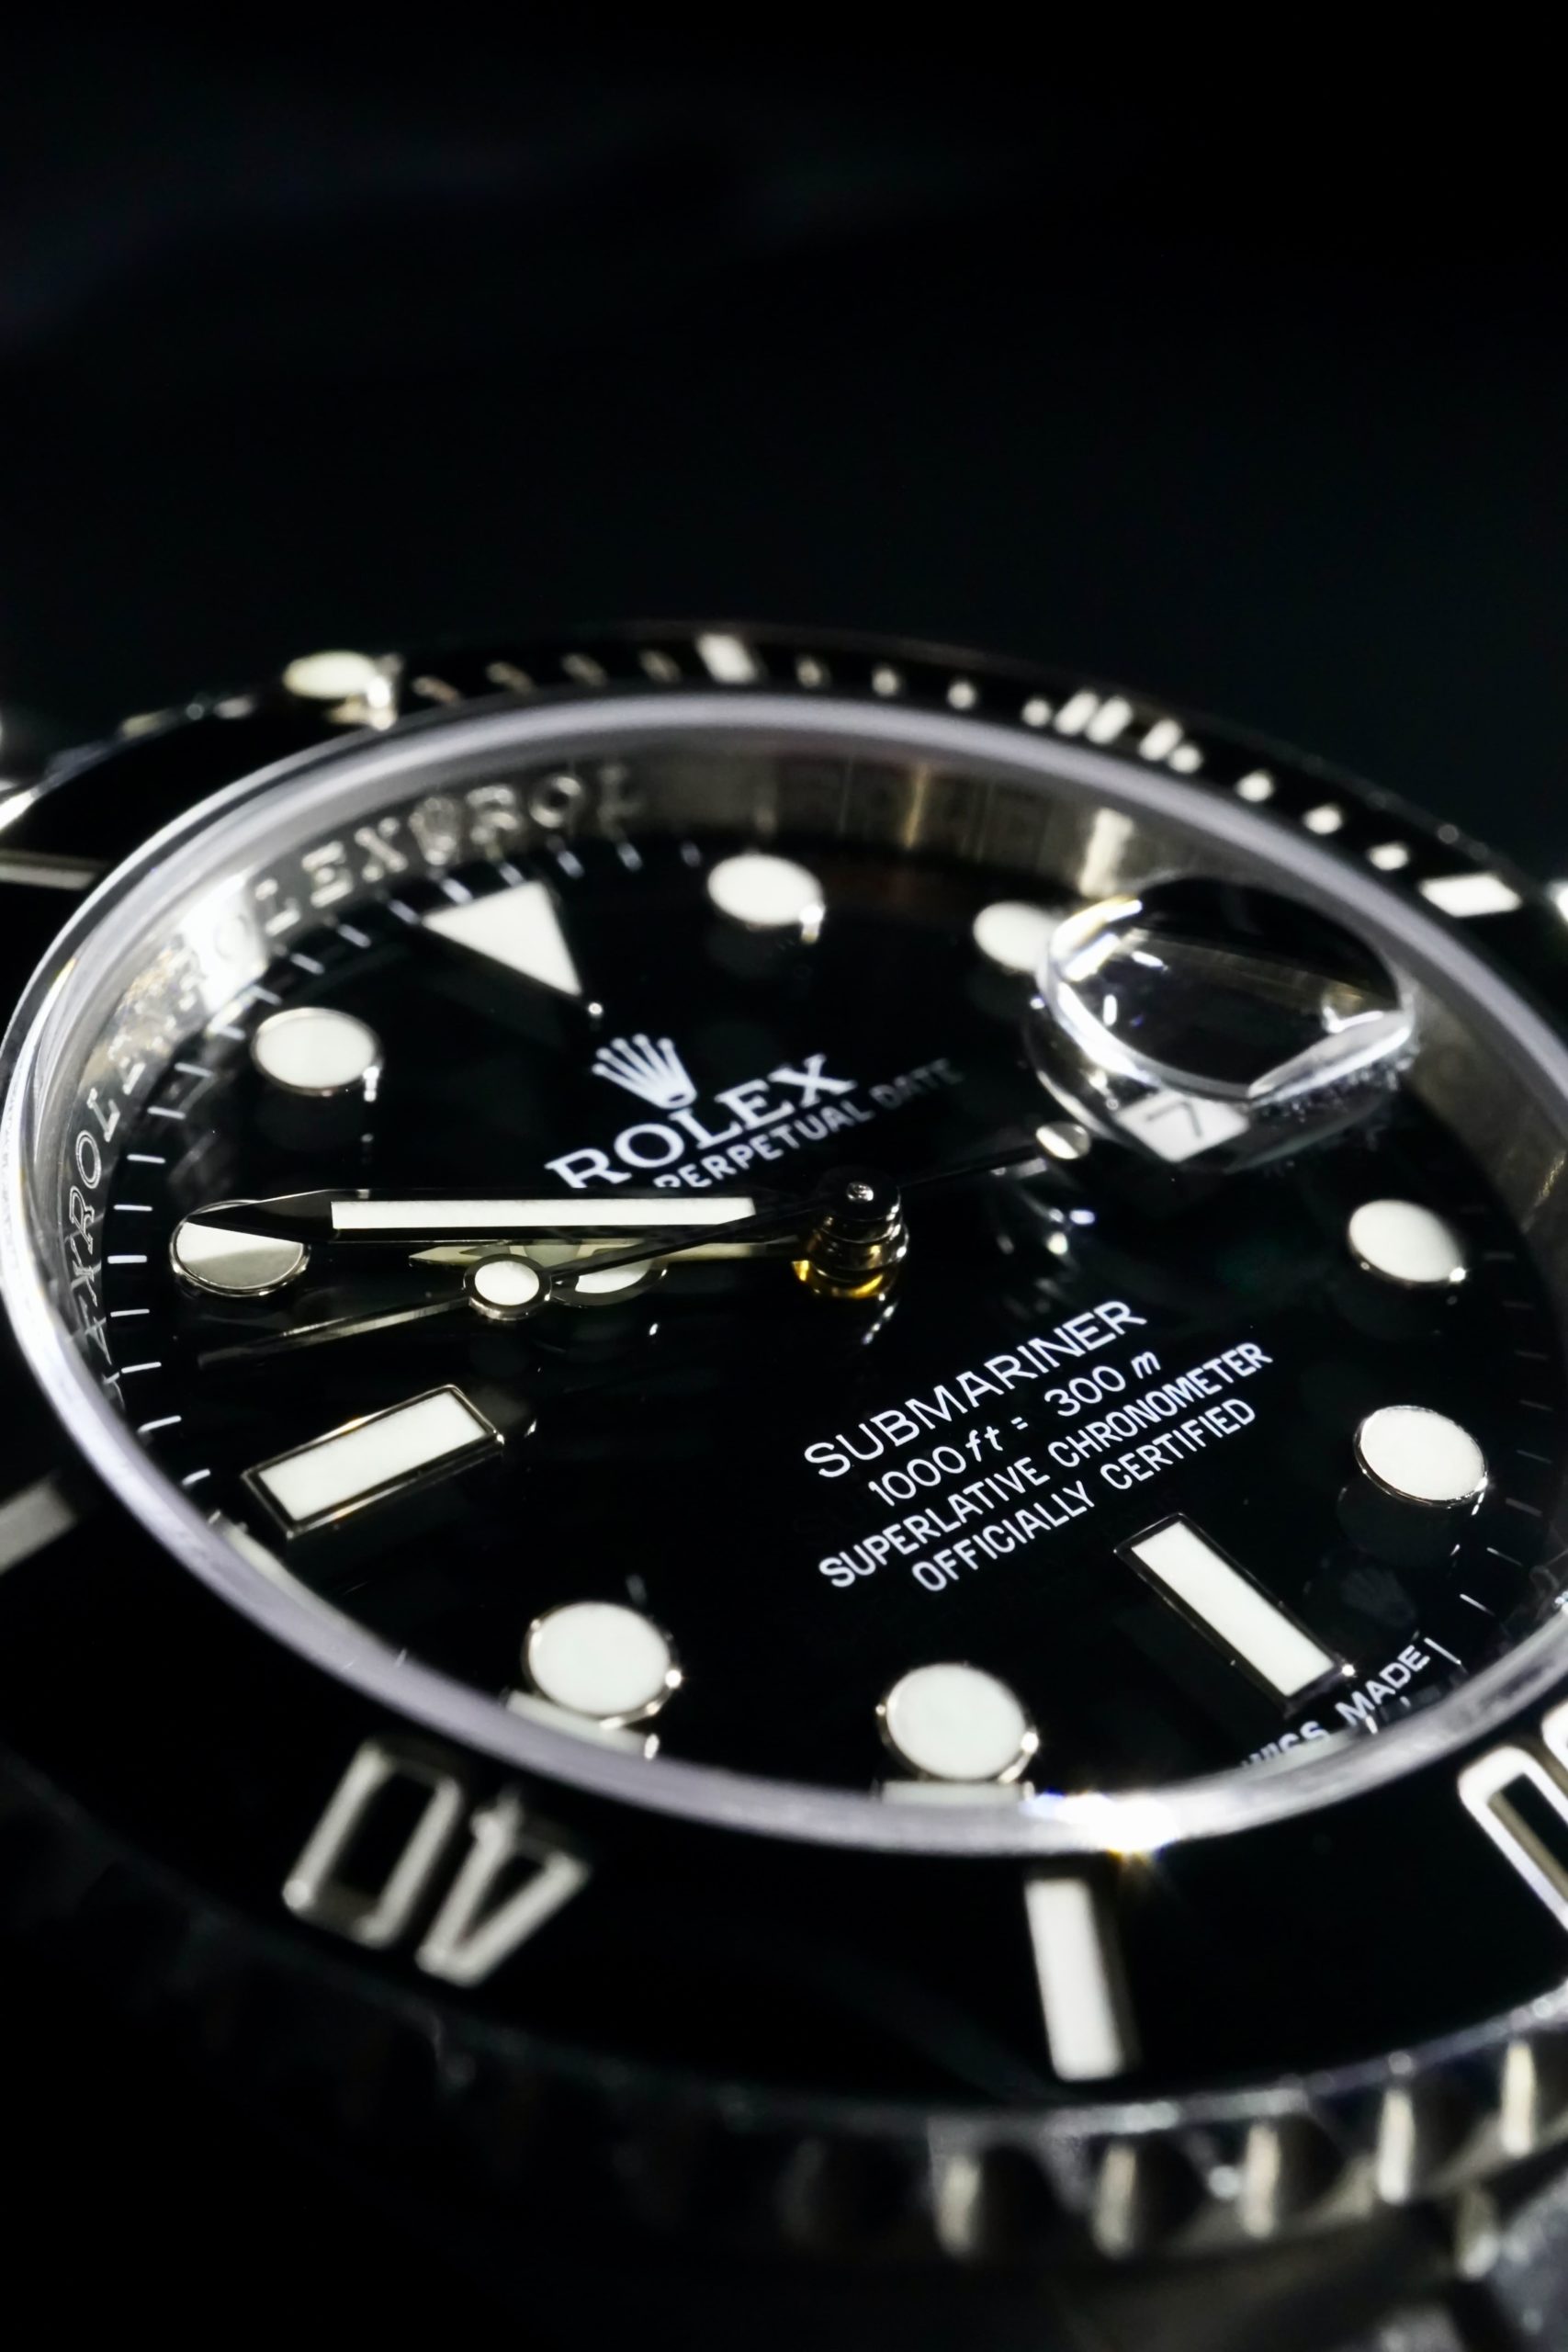 History of the Rolex Yacht-Master